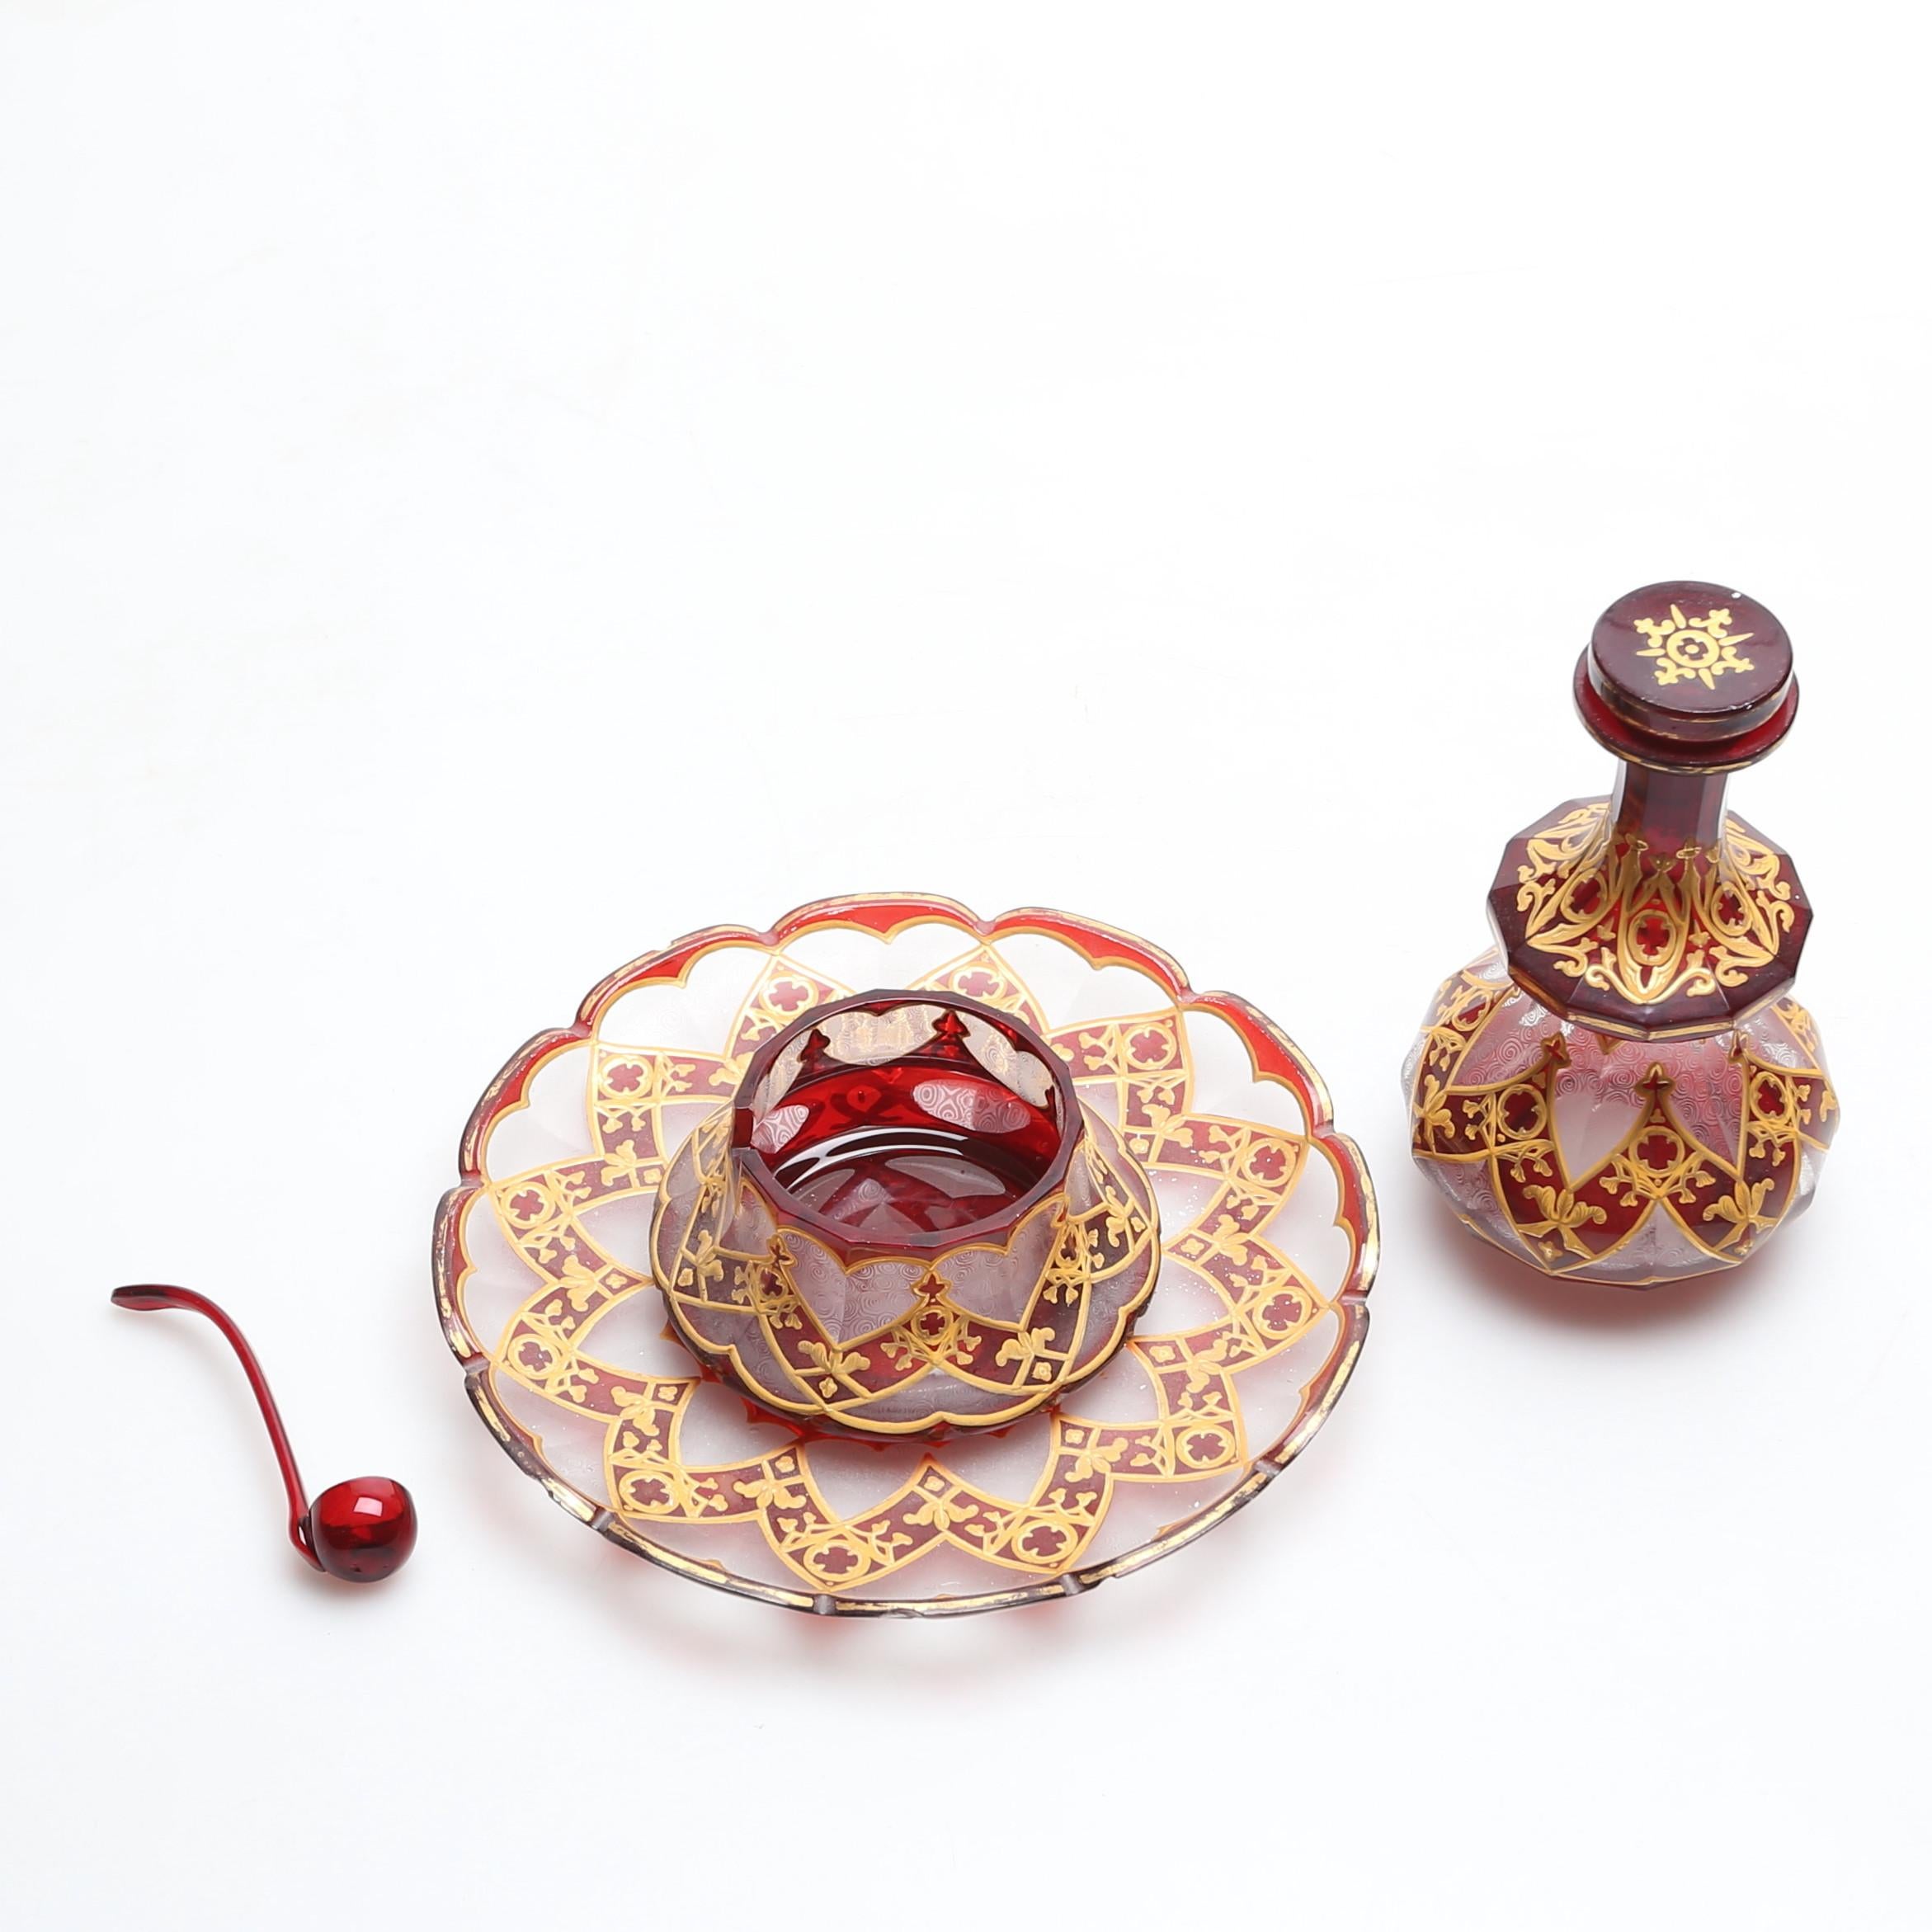 An exquisite bottle and stopper with matching plate, saucer and spoom

Ruby red crystal glass, decorated all around with multiple shapes and patterns

profusely decorated all around with gilded enamel

the plate with gilded scalloped rim

Bohemia,